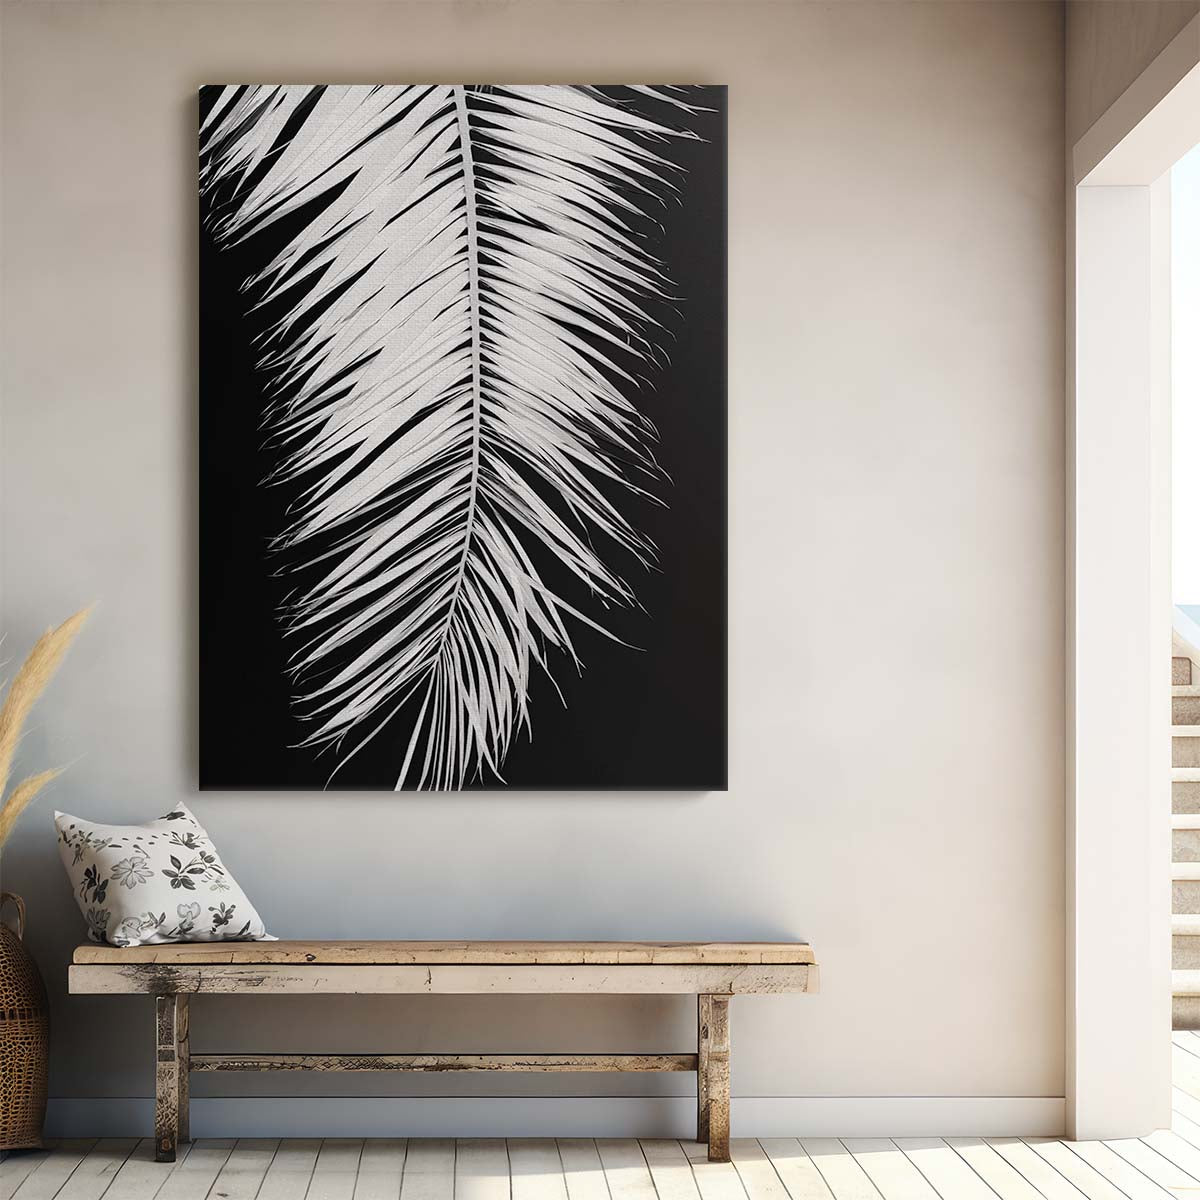 Monochrome Palm Leaf Still Life Photography on Black Background by Luxuriance Designs, made in USA